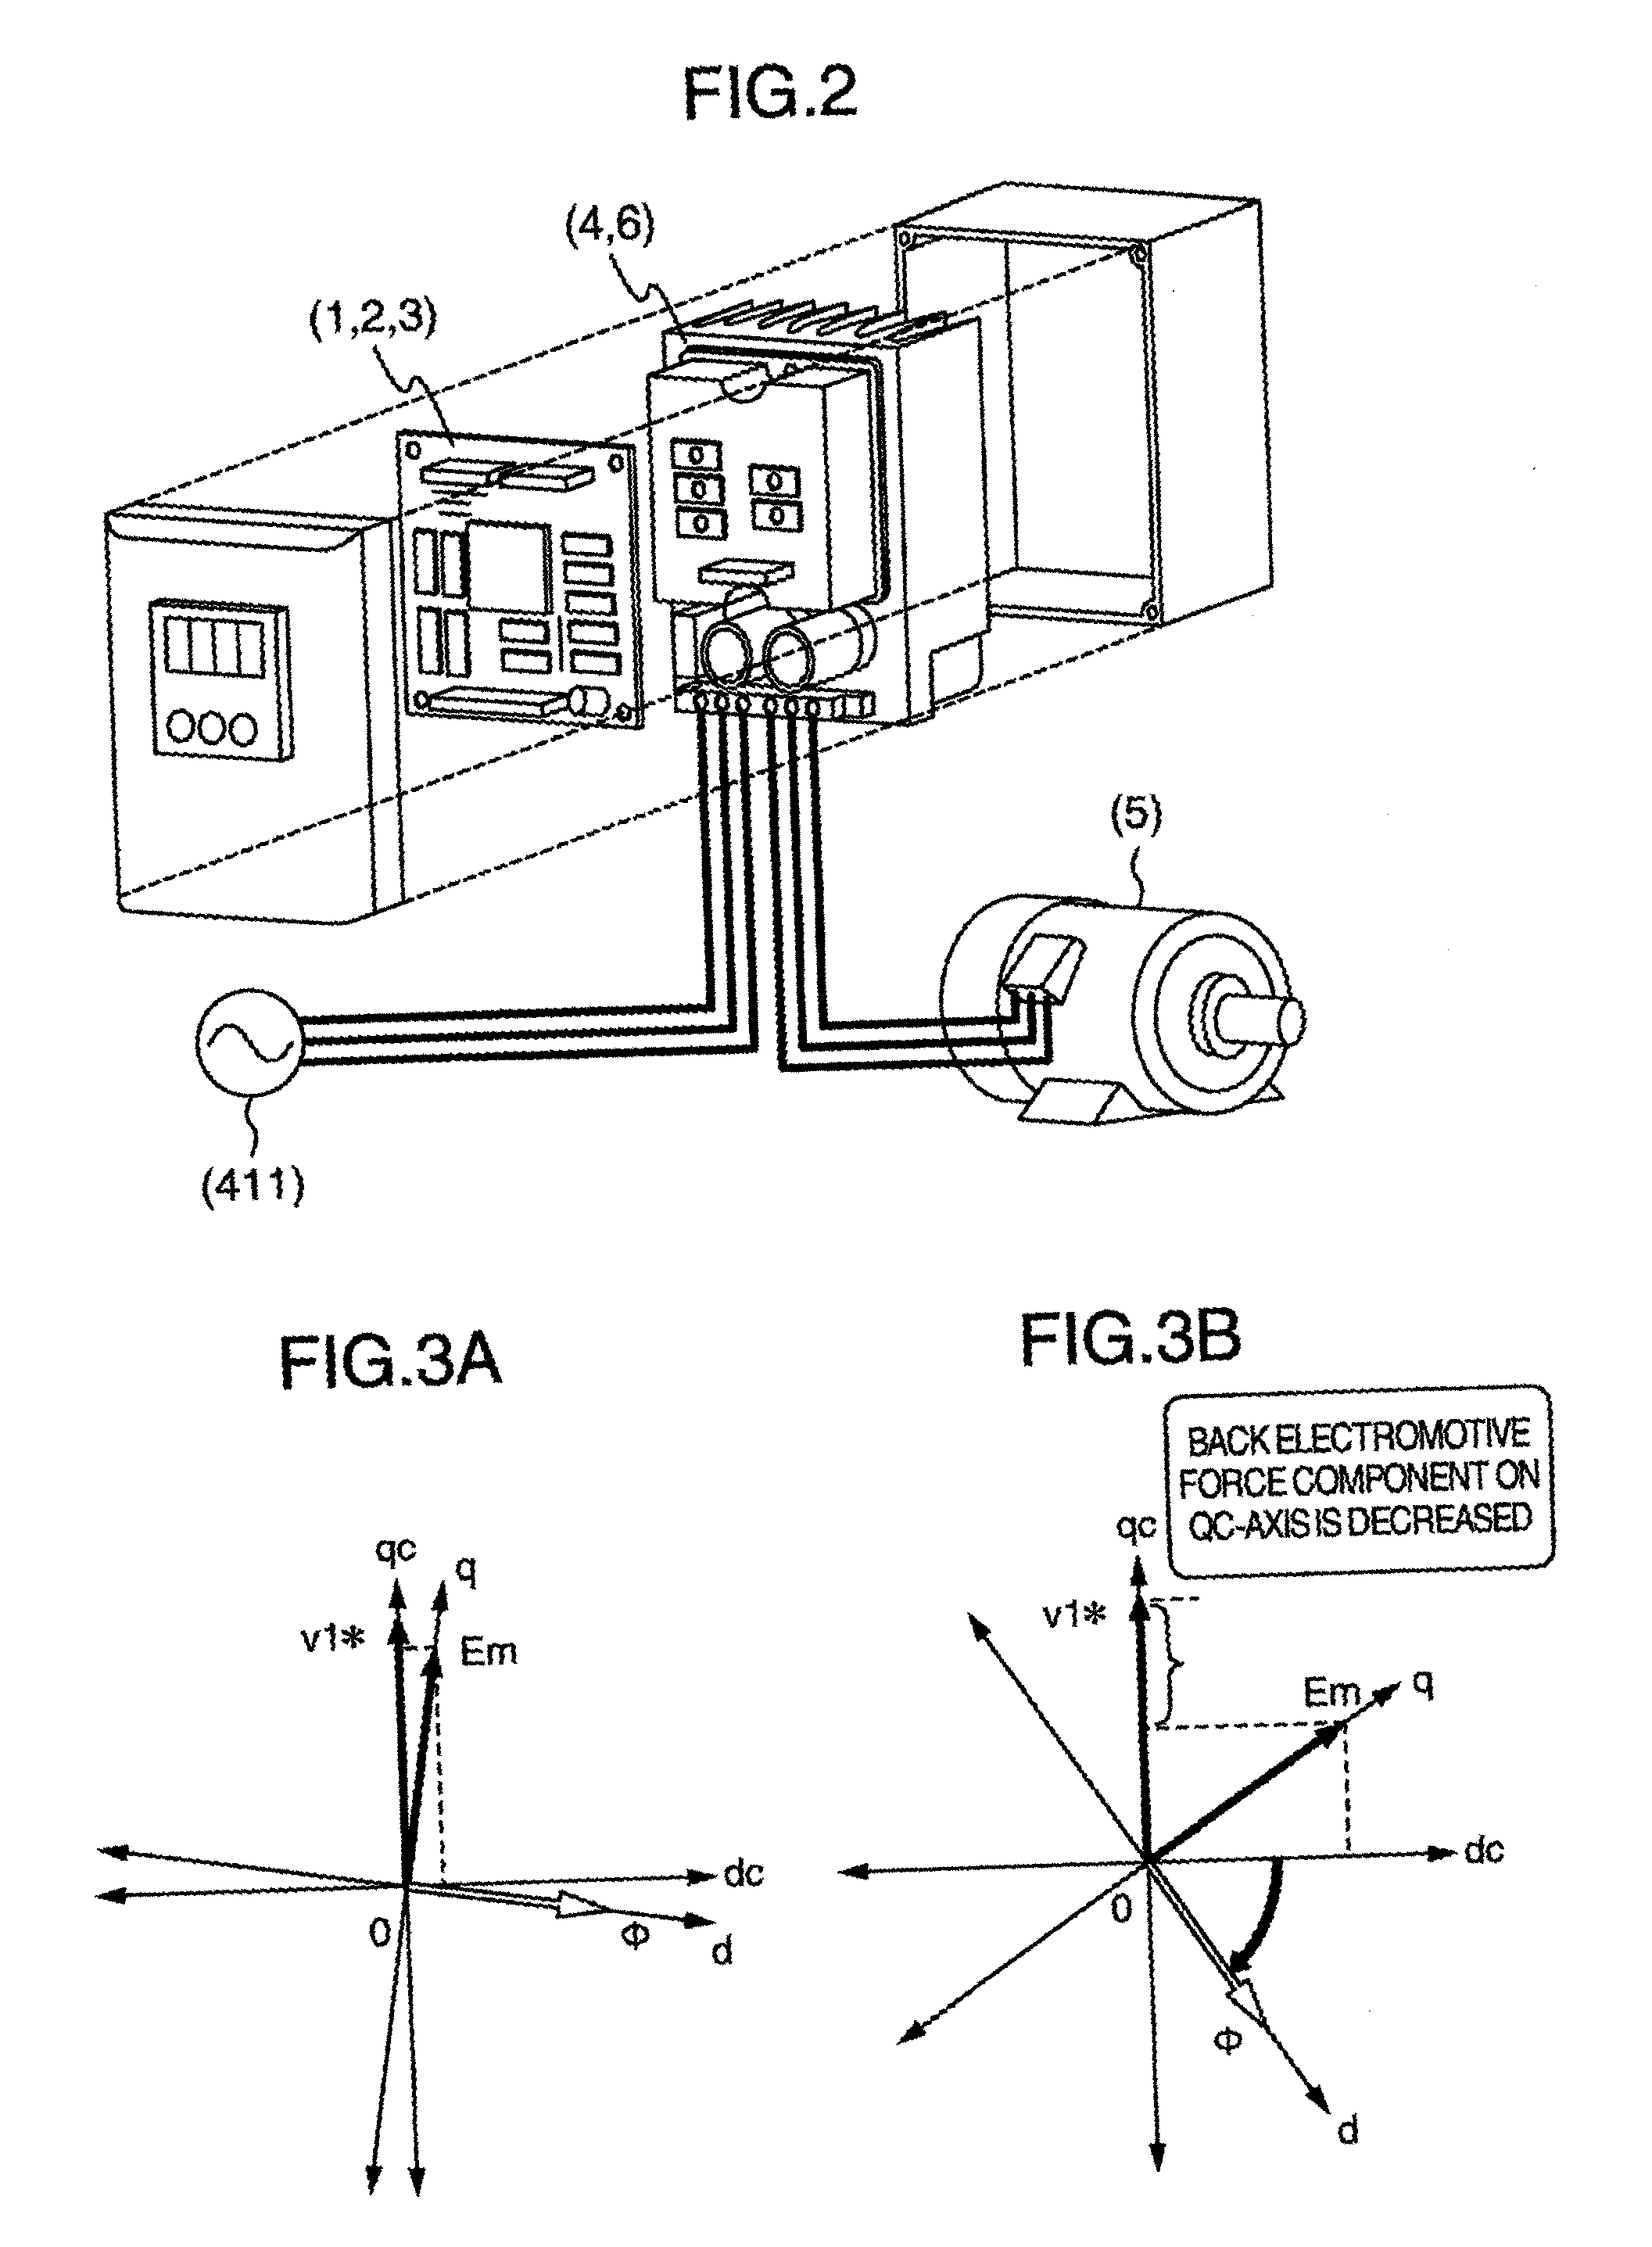 System for driving electric motor